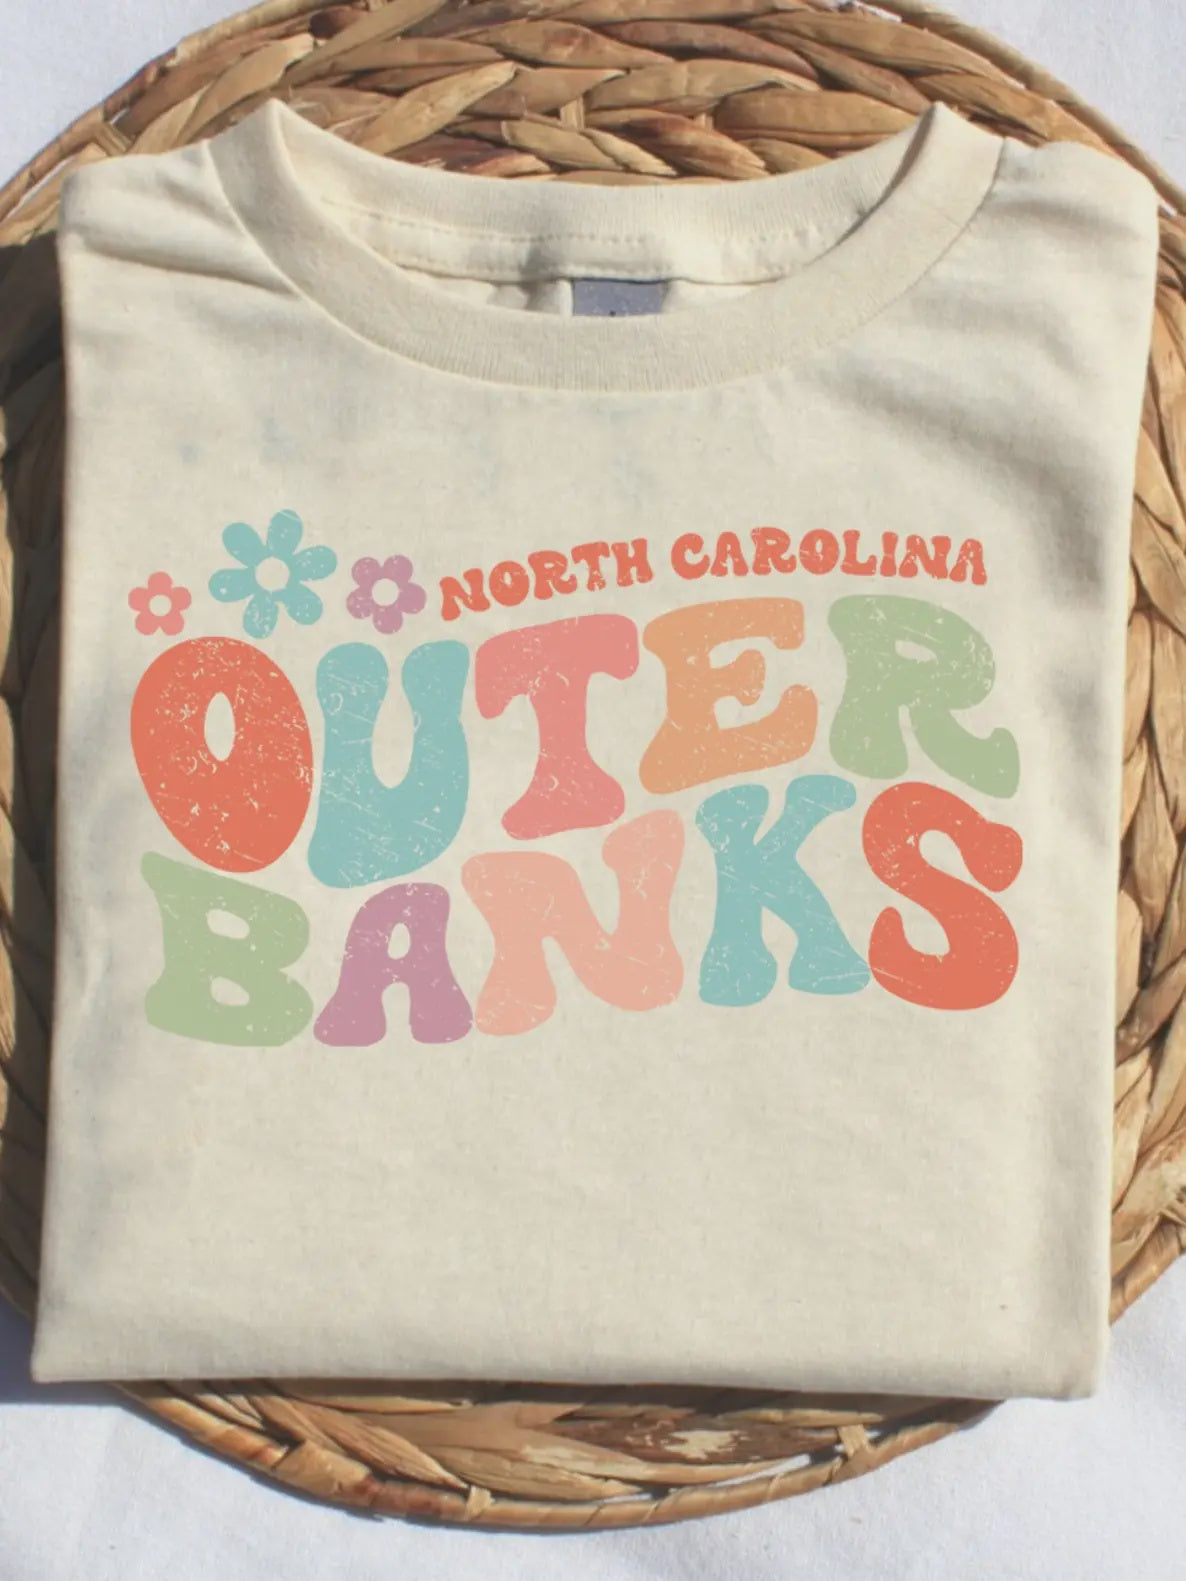 Outer Banks Tee